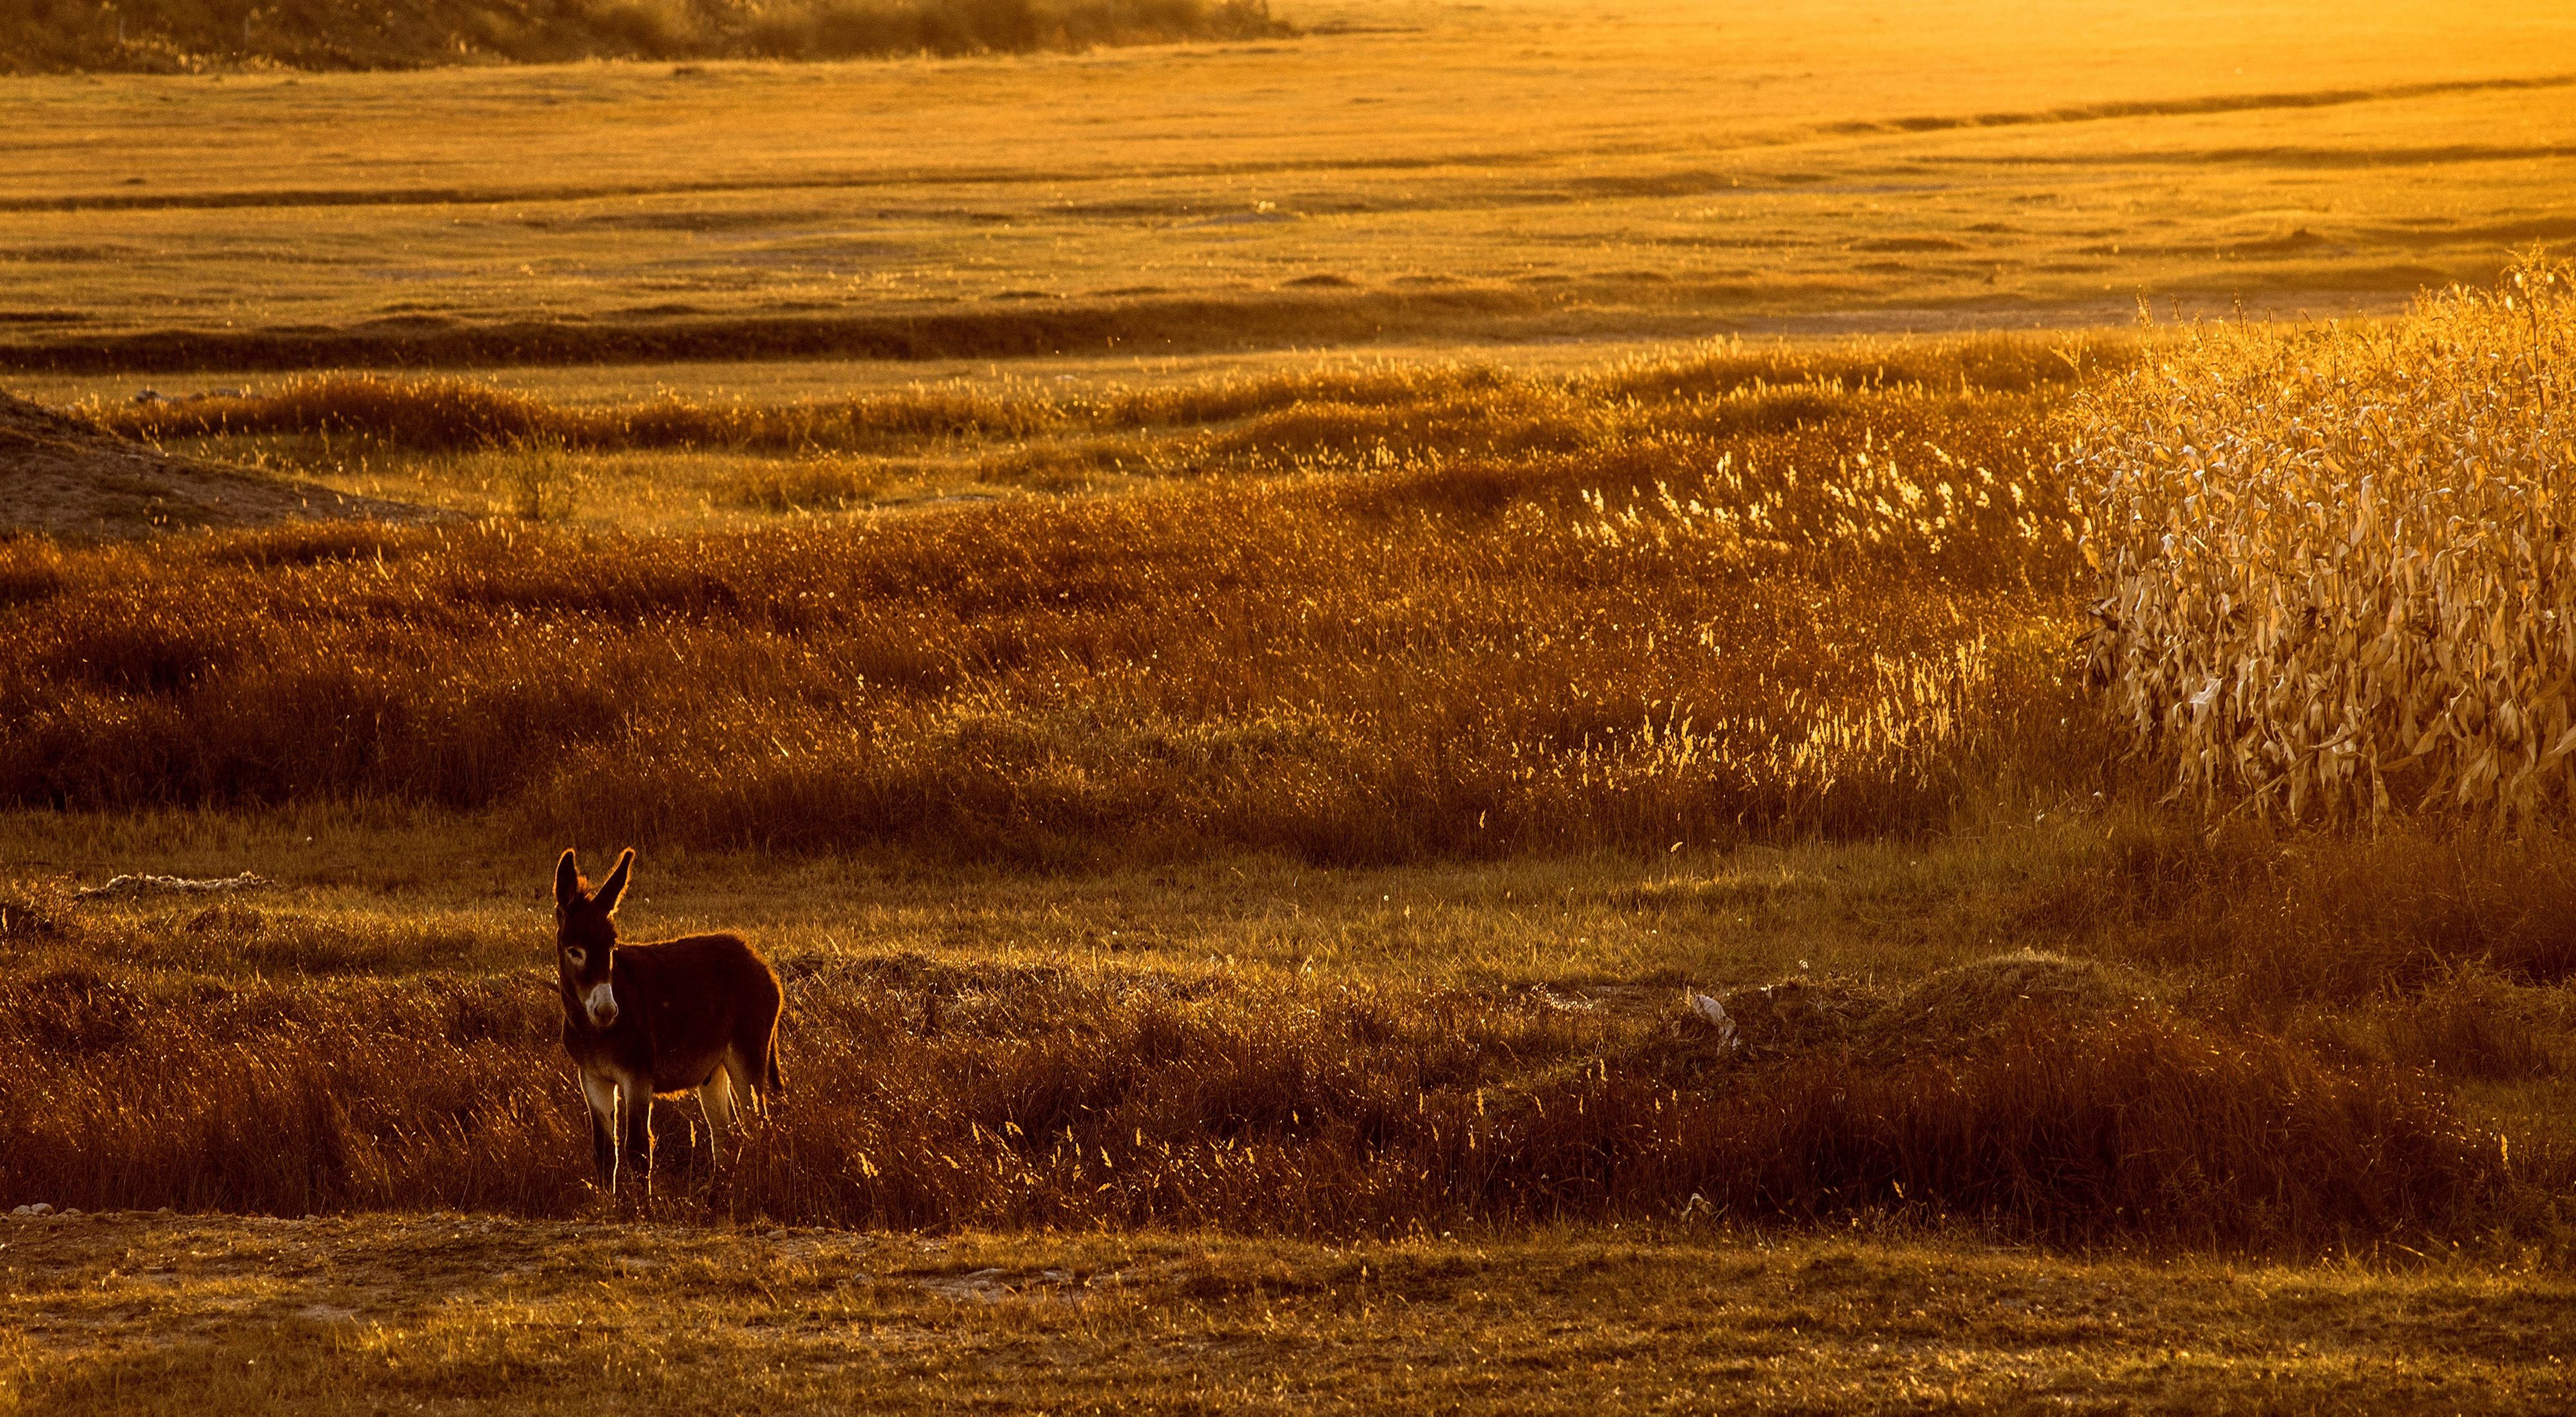 Sunset over Inner Mongolia's grasslands with a donkey in the foreground.